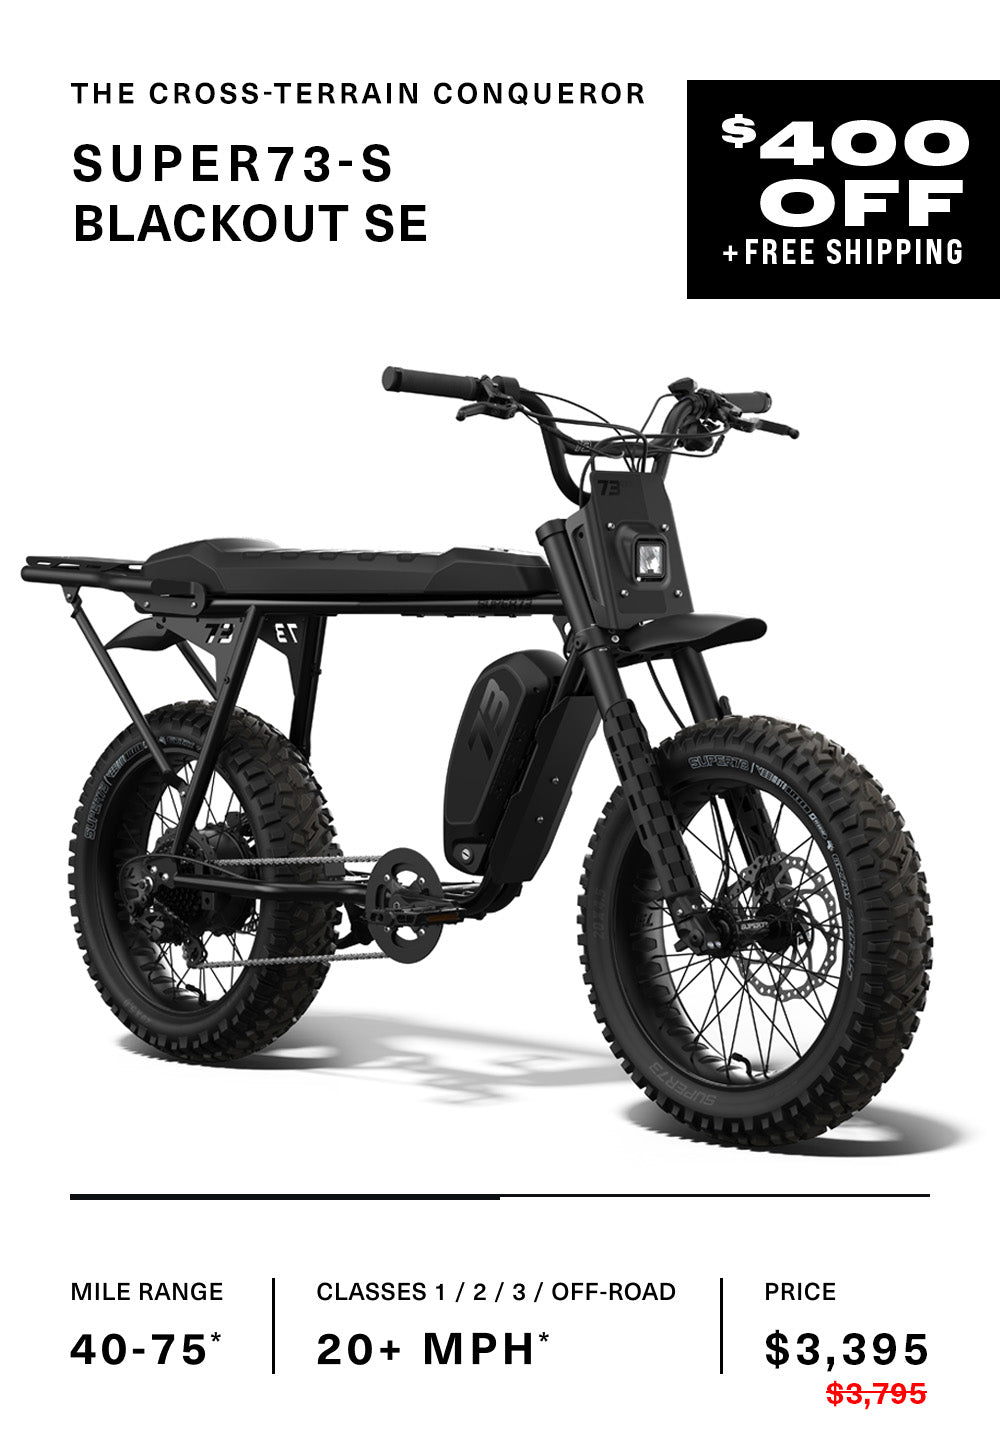 Promotional image showing the S Blackout bike at $400 off with free shipping